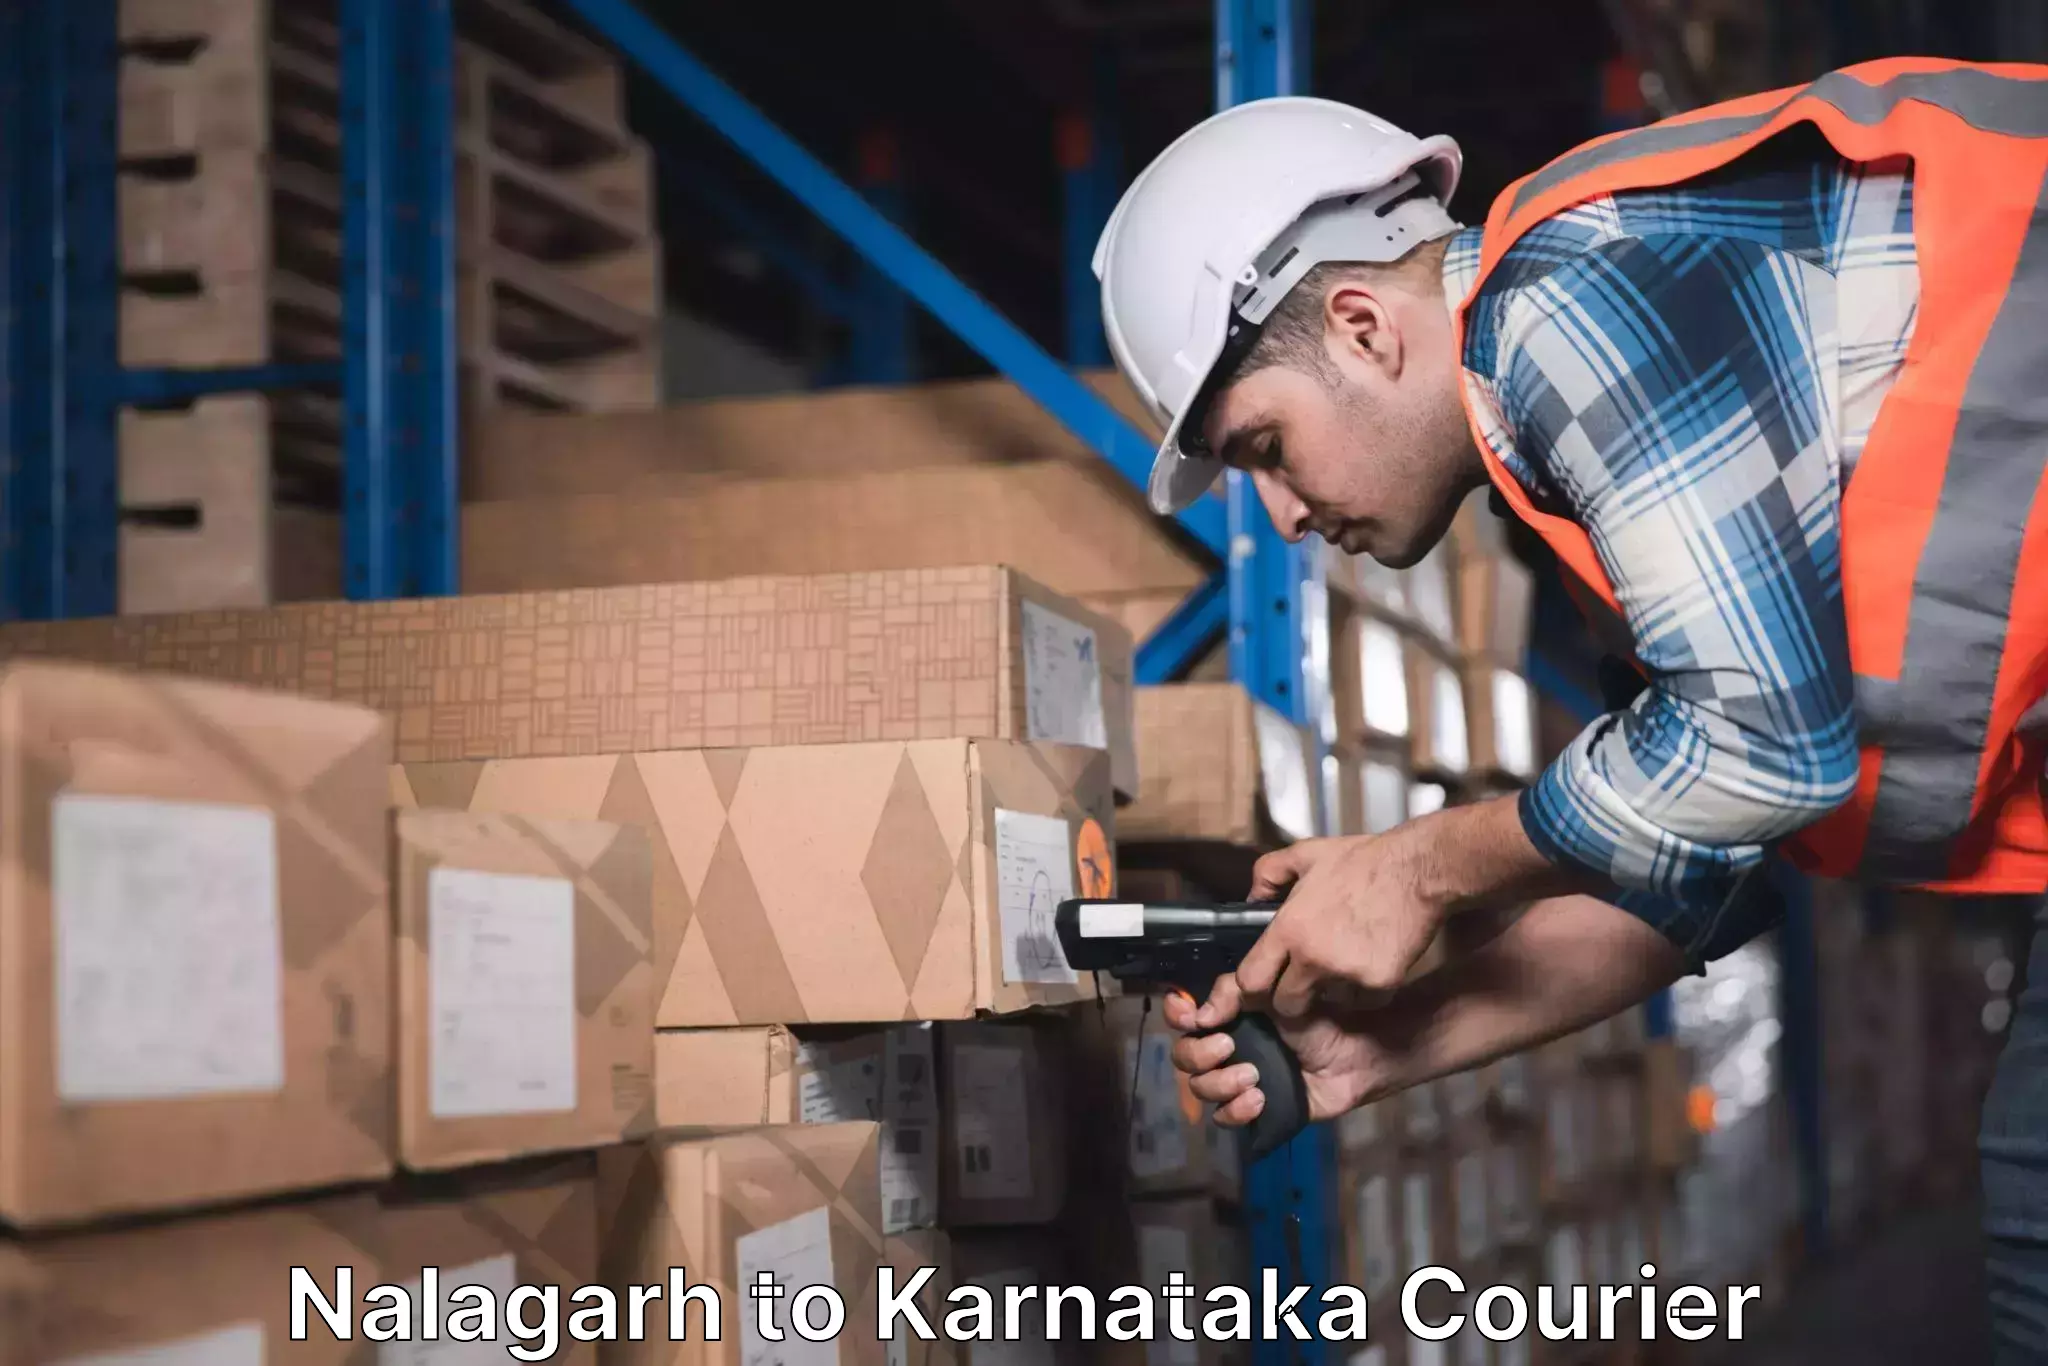 Personal courier services Nalagarh to Mysore University